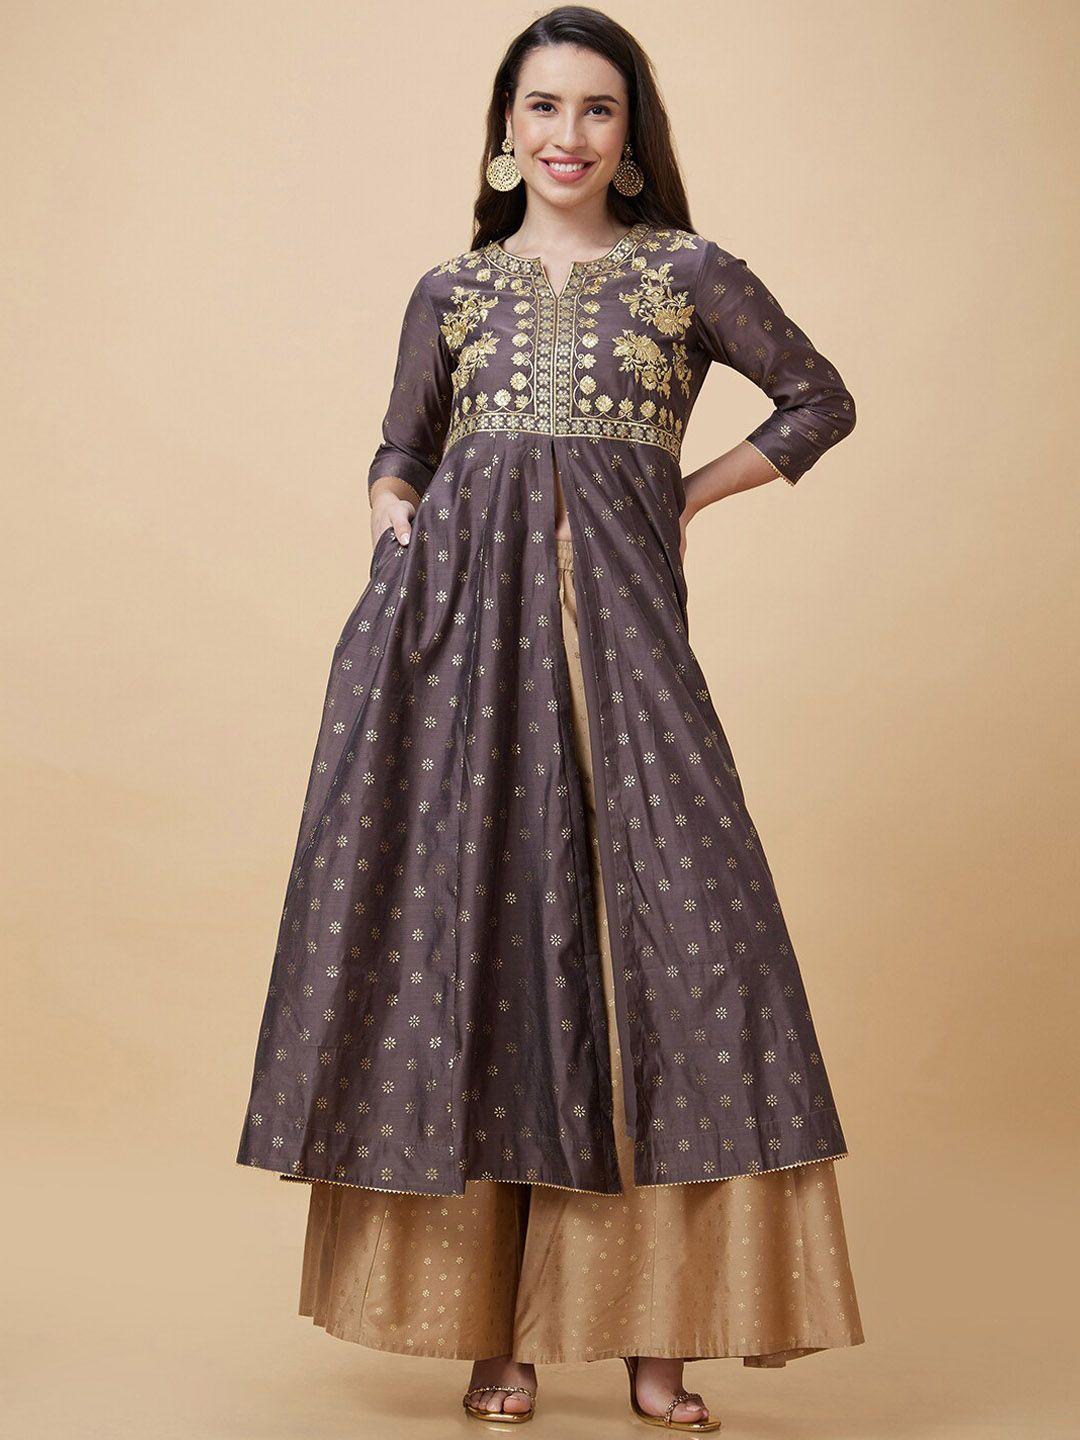 globus floral embroidered foil printed round neck a-line kurta